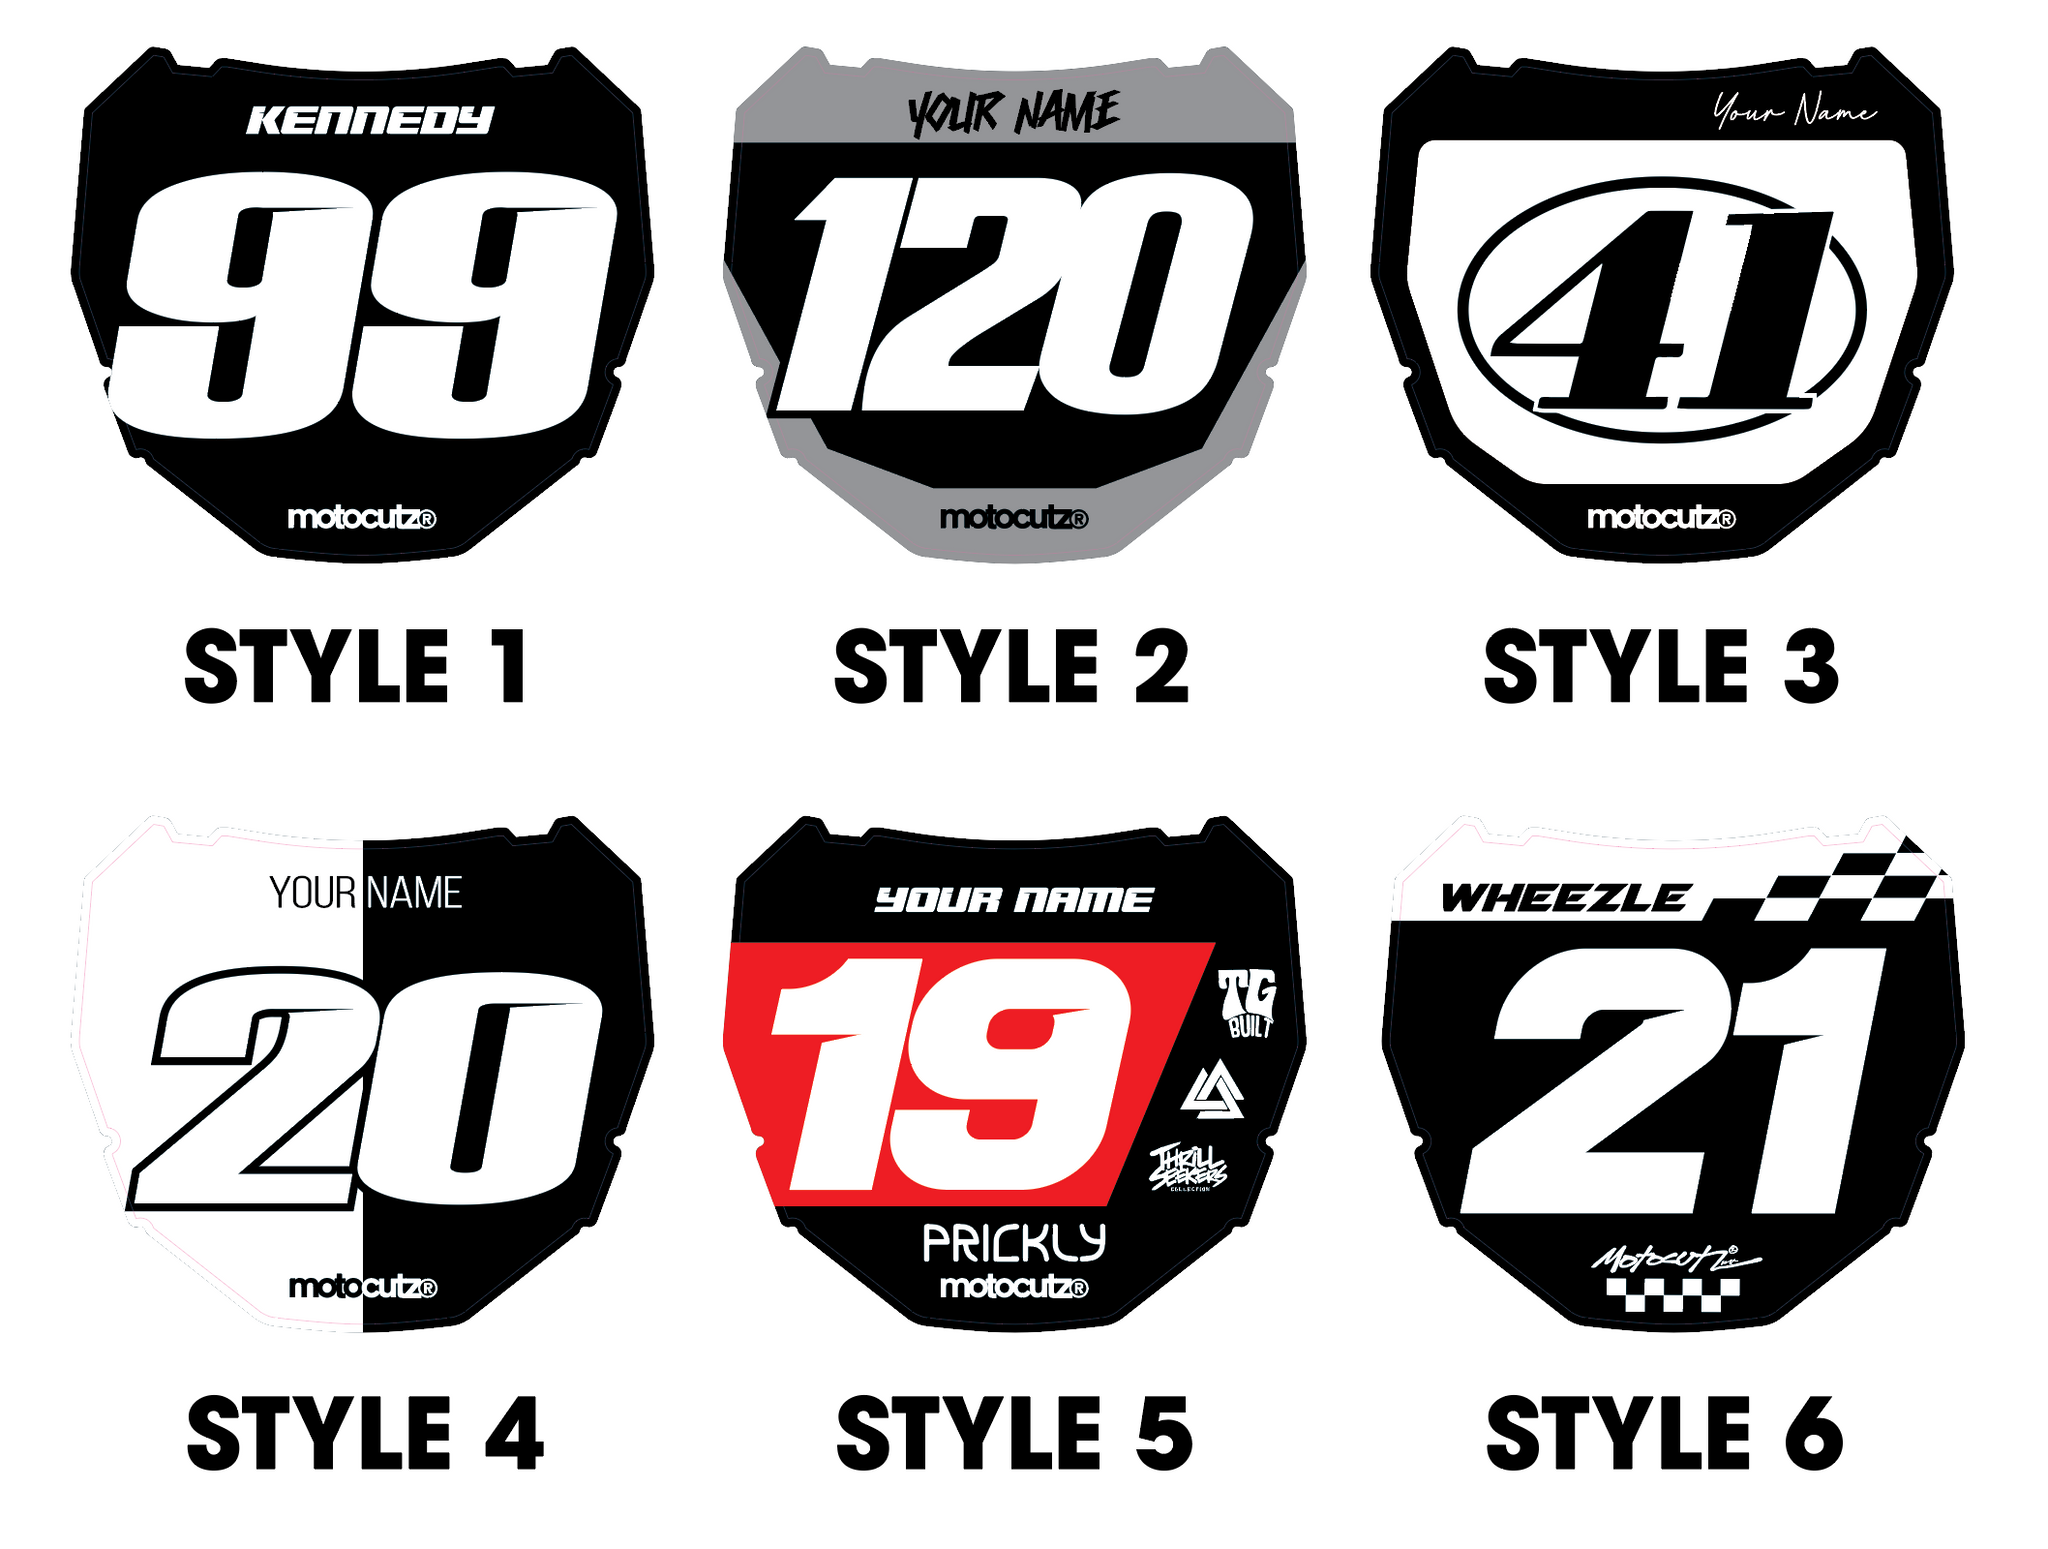 SURRON NUMBER PLATE DECAL – MotocutzMX